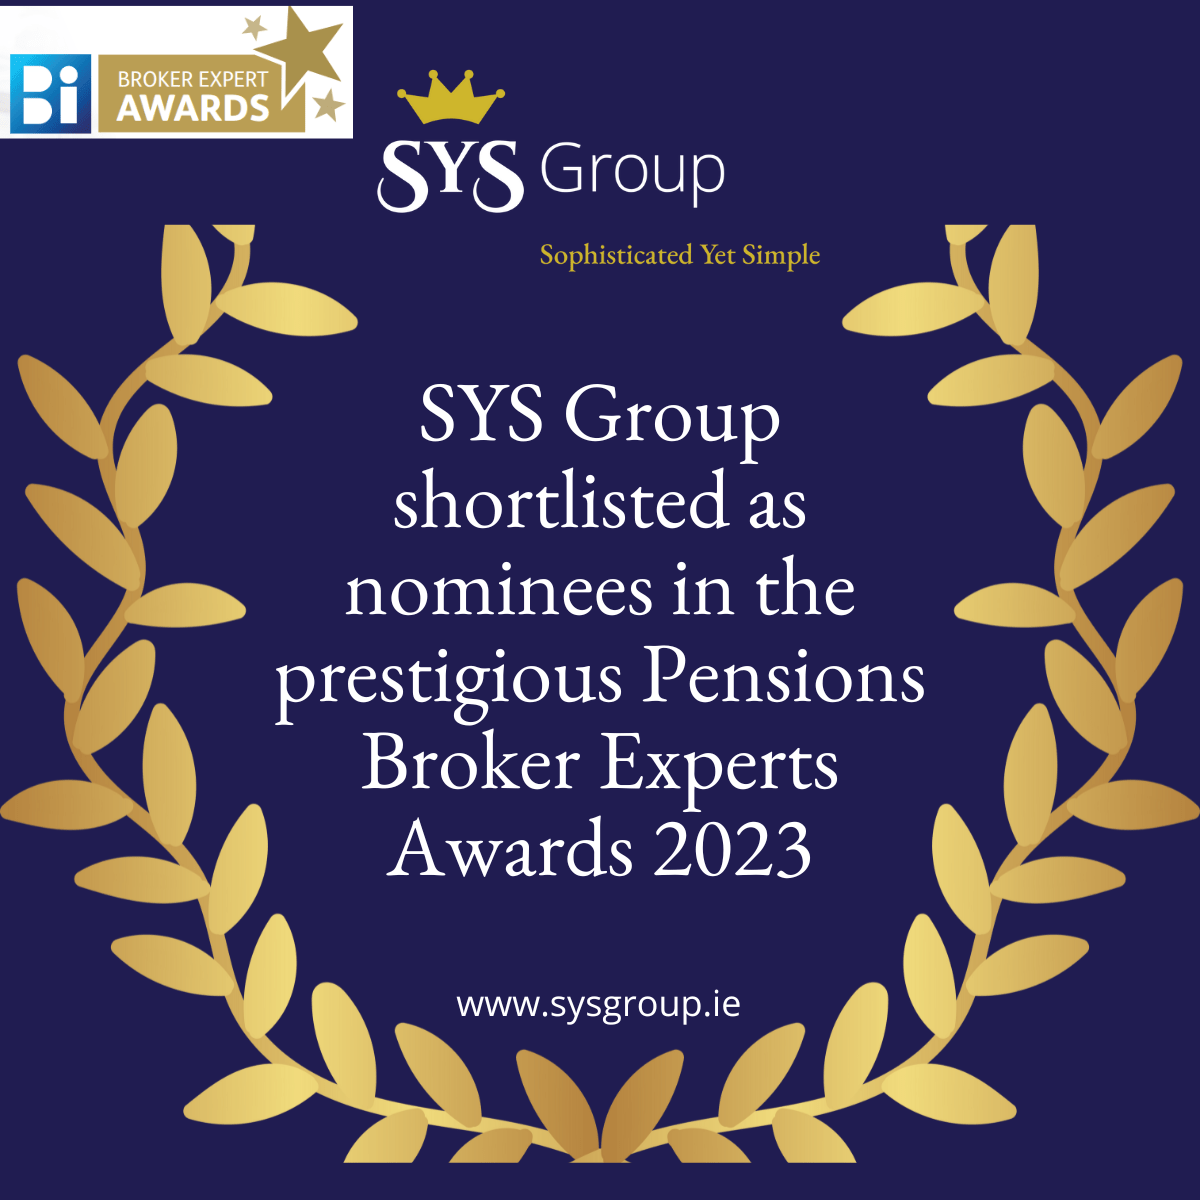 SYS Group shortlisted as nominees in the prestigious Pensions Broker Experts Awards 2023